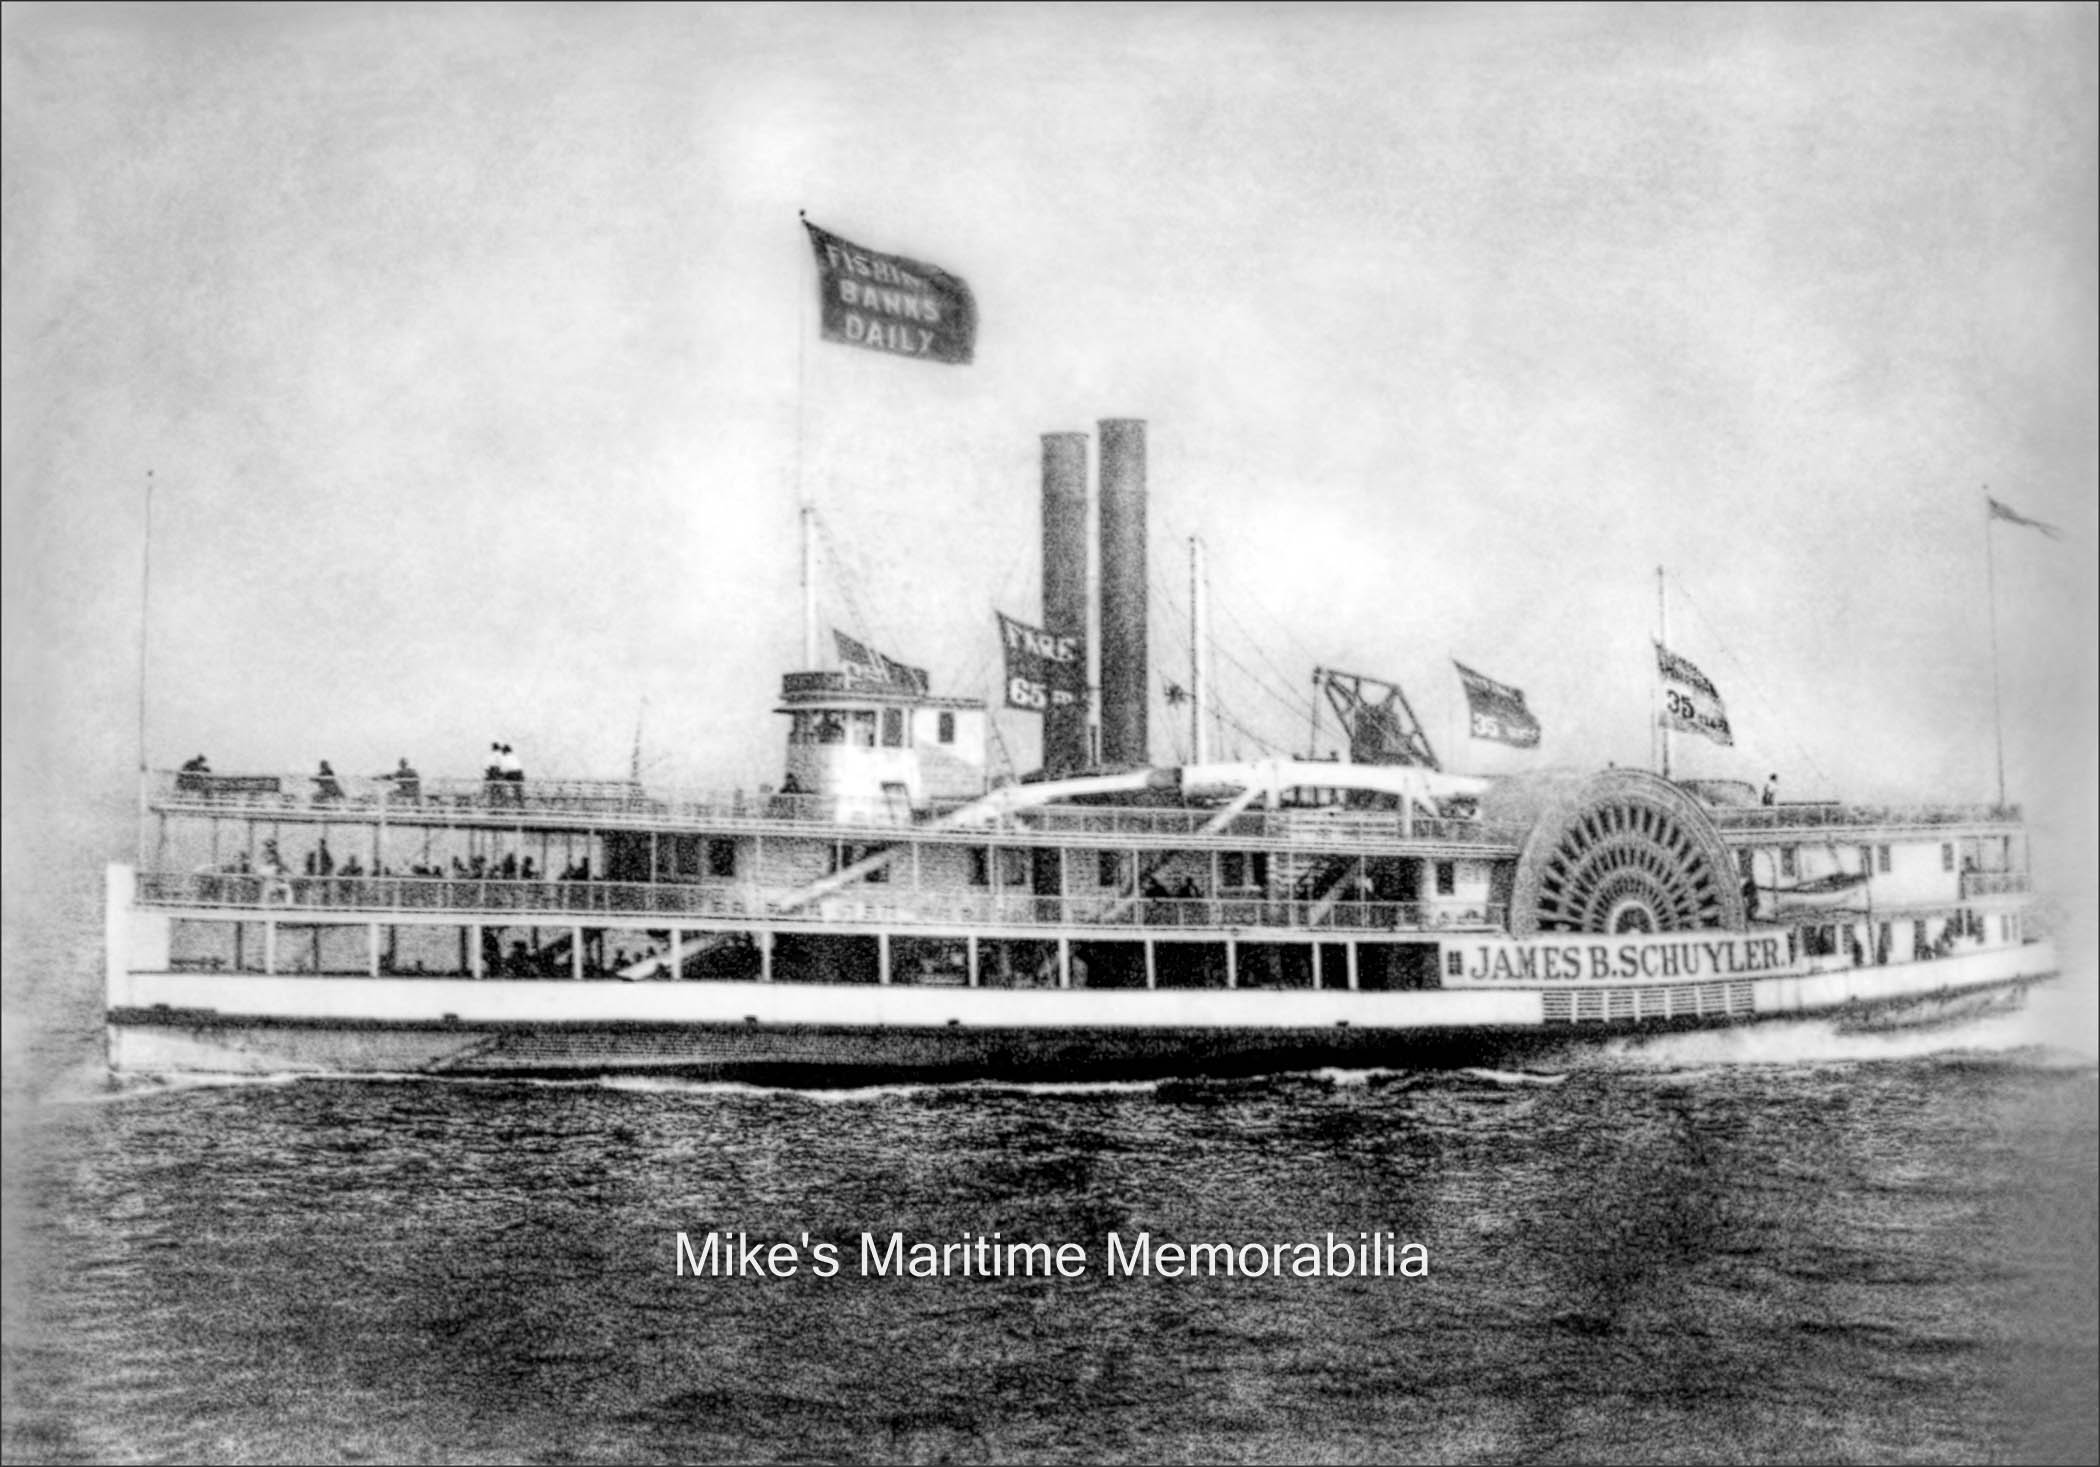 JAMES B. SCHUYLER, New York, NY – 1890 The "JAMES B. SCHUYLER" from New York City circa 1890. Built in 1865 at Jersey City, NJ, this 'triple-decker' steamboat initially served as an excursion boat; she began party boat fishing in 1881. Captain Joseph Hancox owned and operated her and she was one of the premier steamboats to sail daily to the local fishing banks from Manhattan's East River. The "JAMES B. SCHUYLER" was 185 feet in length and carried as many as 700 passengers. Of note are the flags flying from the masts. The topmost flag says "FISHING BANKS DAILY" and the other flags advertise the fares of 65 cents for men and 35 cents for ladies and children. In 1897, the "JAMES B. SCHUYLER" caught fire while moored at the pier and burned to the waterline.